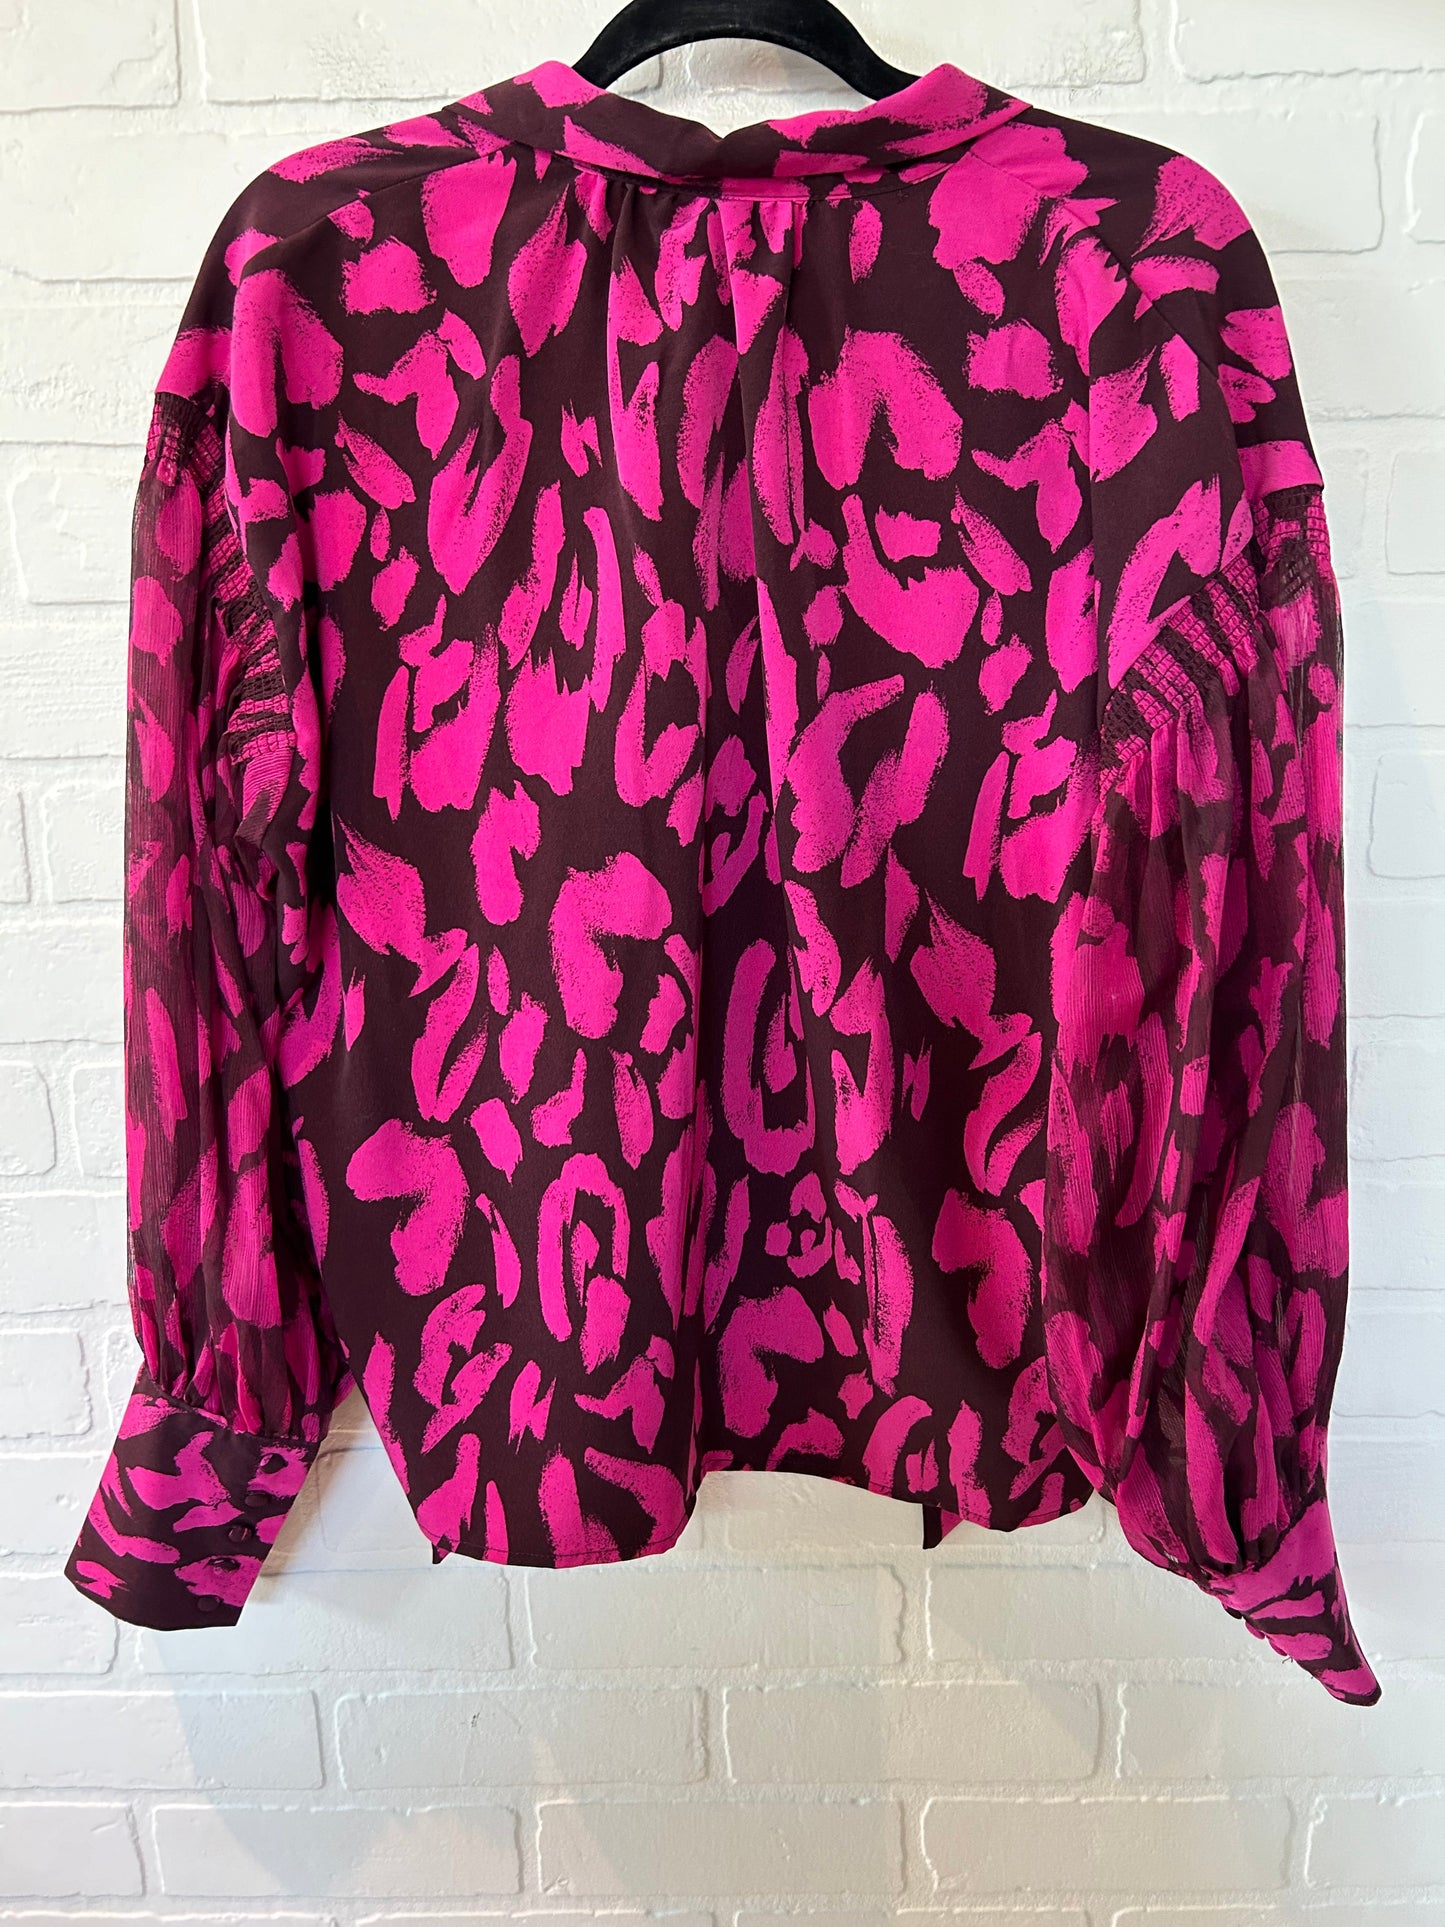 Brown & Pink Top Long Sleeve Who What Wear, Size L